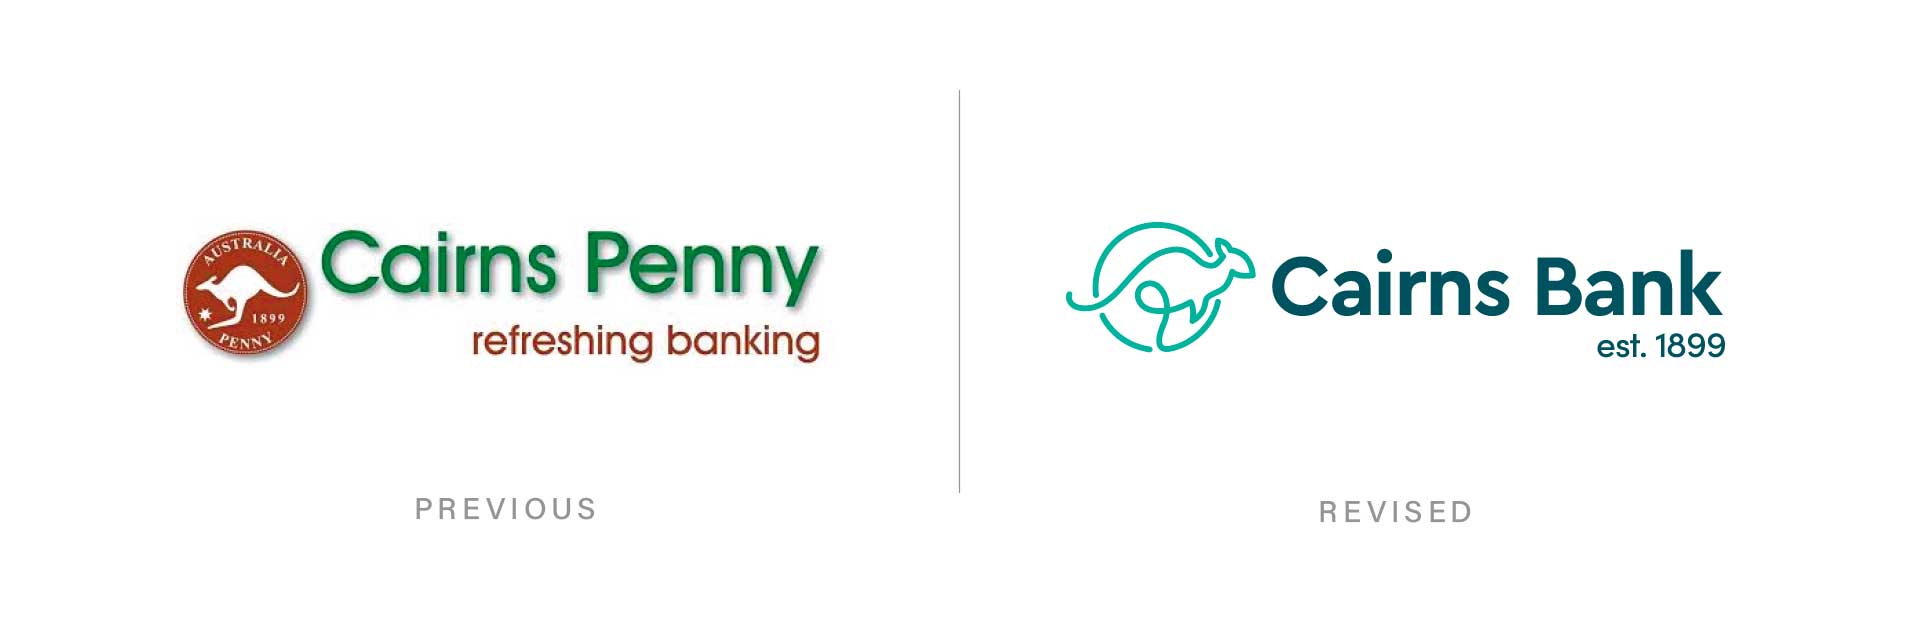 Cairns Penny old logo Cairns Bank new logo and rebrand